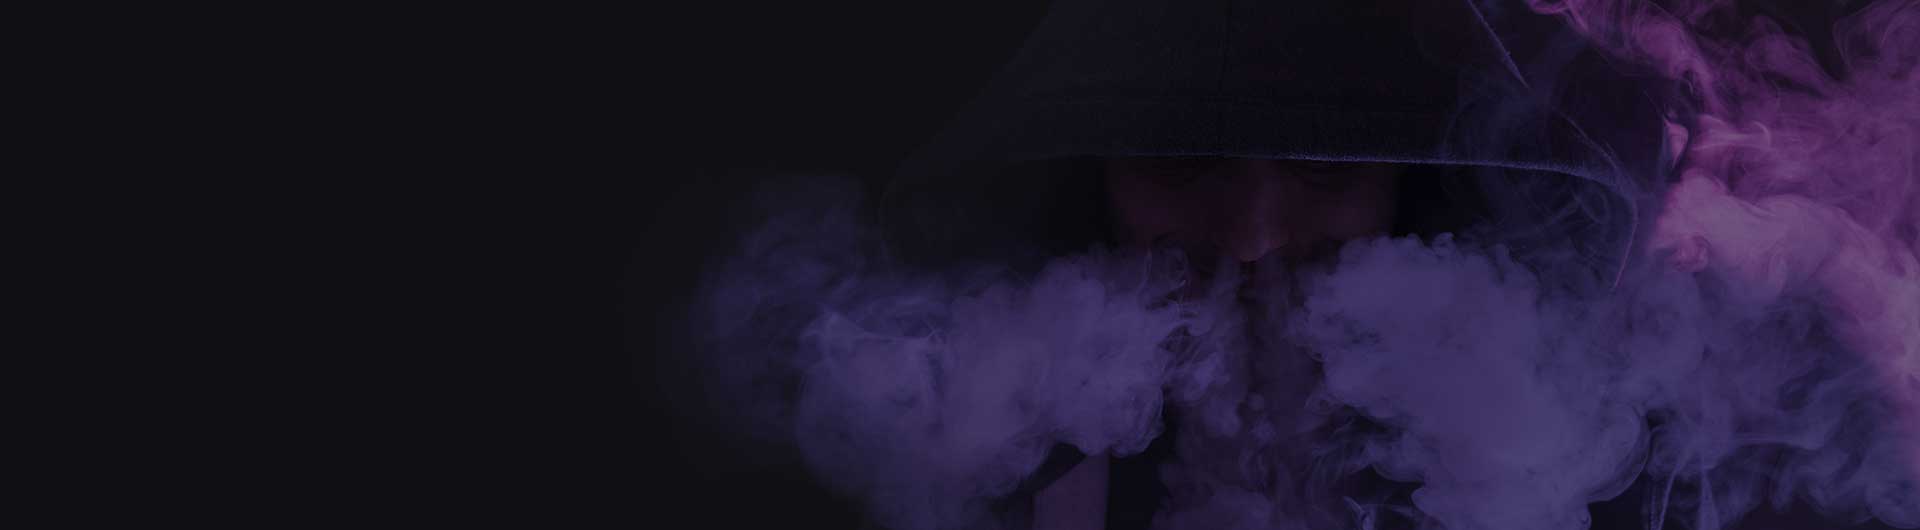 Young man on a dark background holding an electronic cigarette, vaping device.